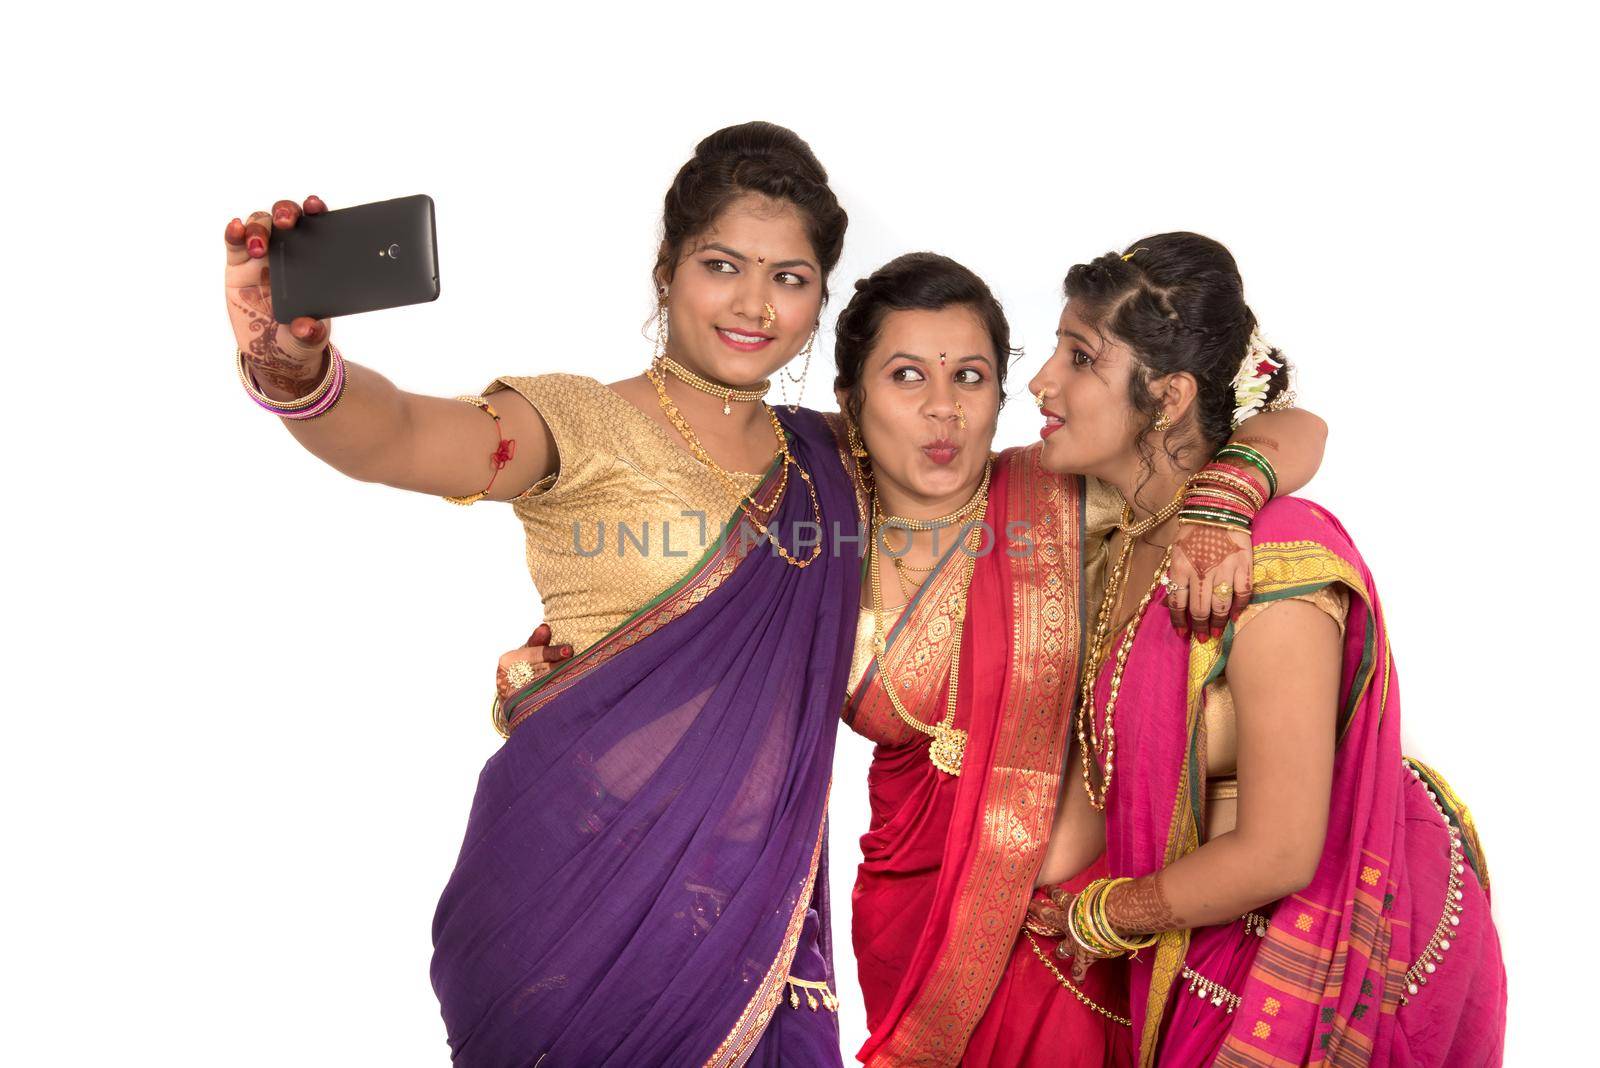 Indian traditional girls taking selfie with smartphone on white background by DipakShelare